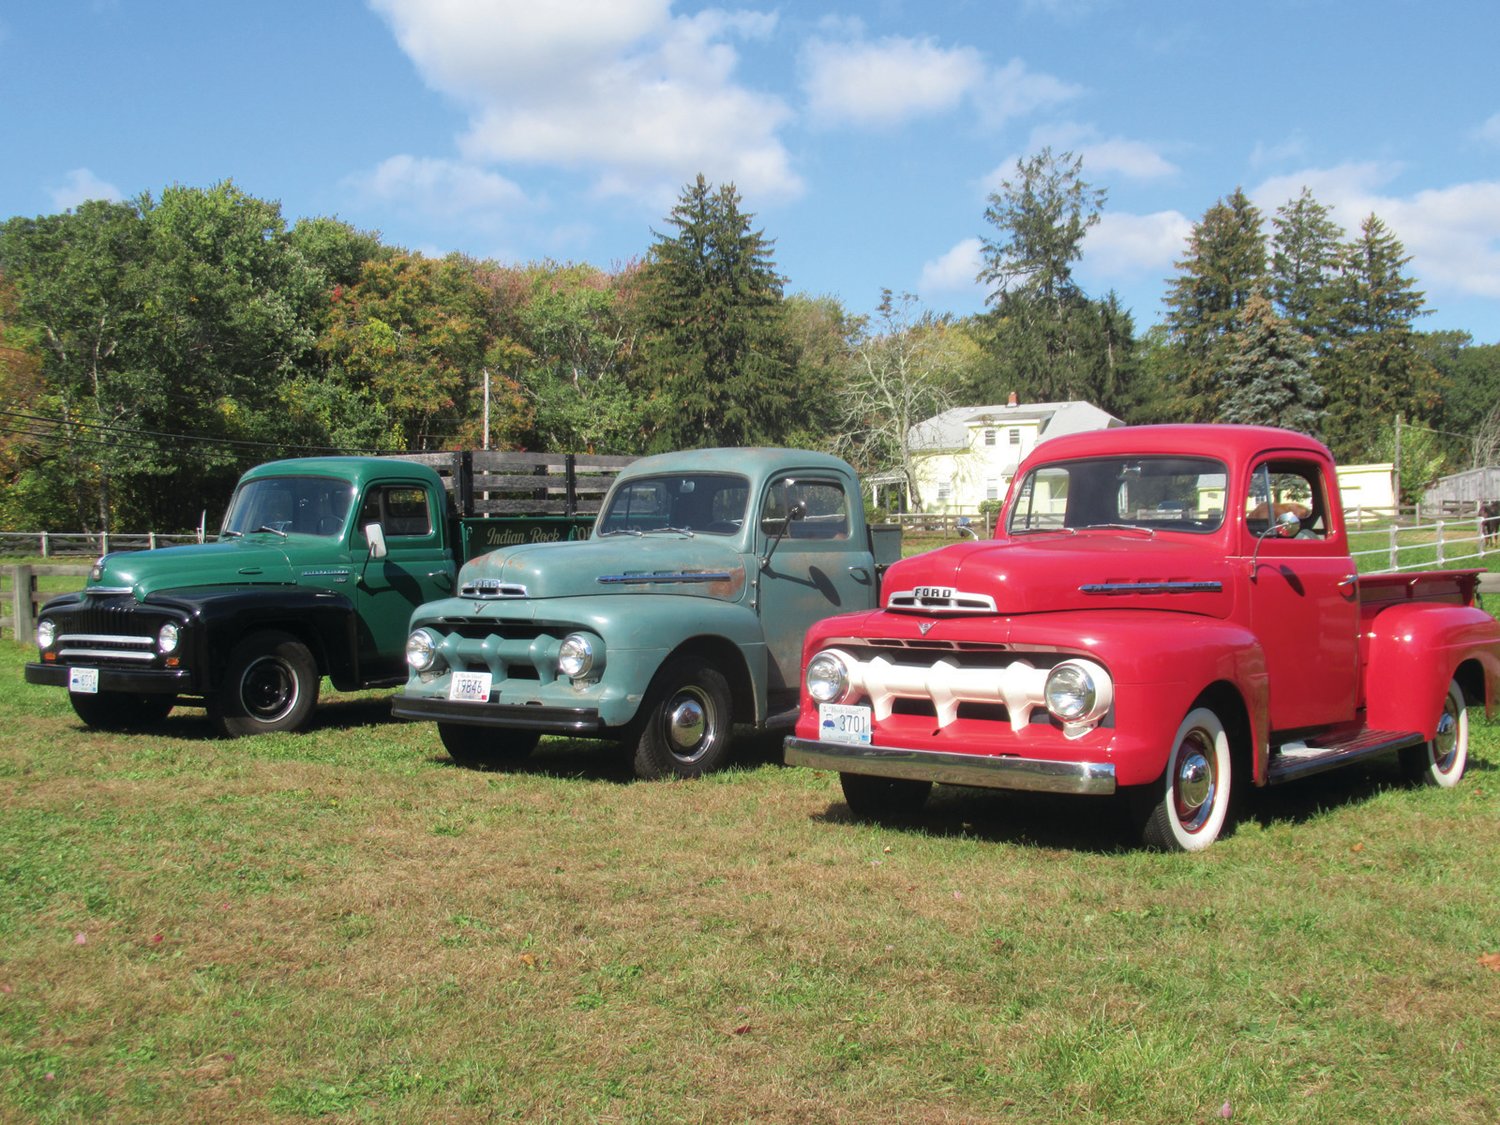 MANY MEMORIES: People who took in Sunday’s Ocean State Vintage Haulers Fall Round-up enjoyed a step back in time when pickup trucks featured wide whitewall tires like the one above.